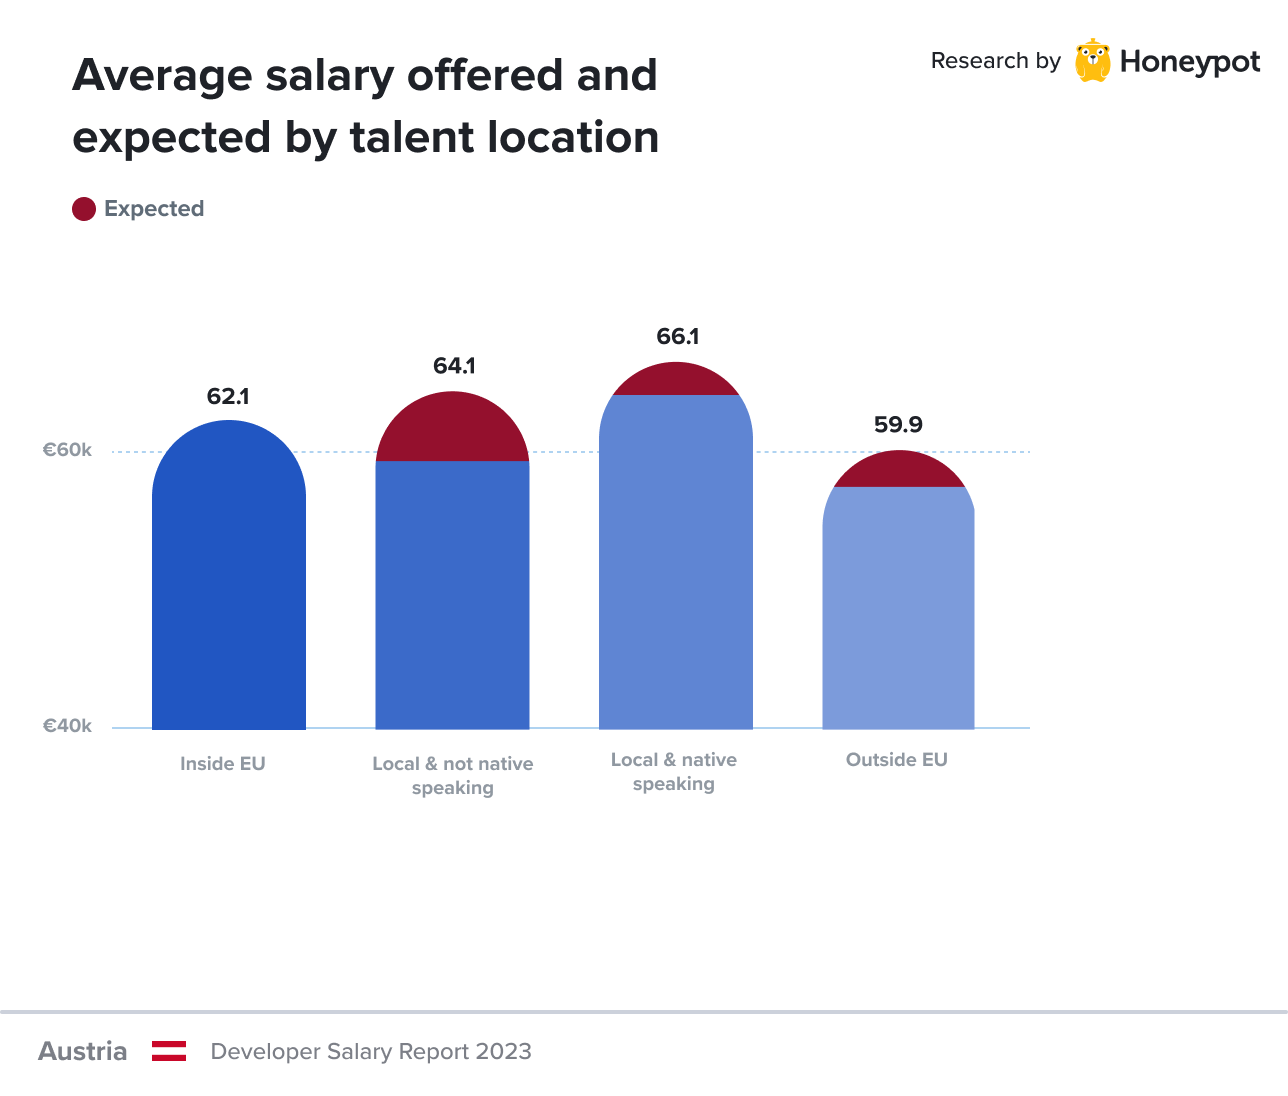 Austria – Average salary offered vs. expected by talent location